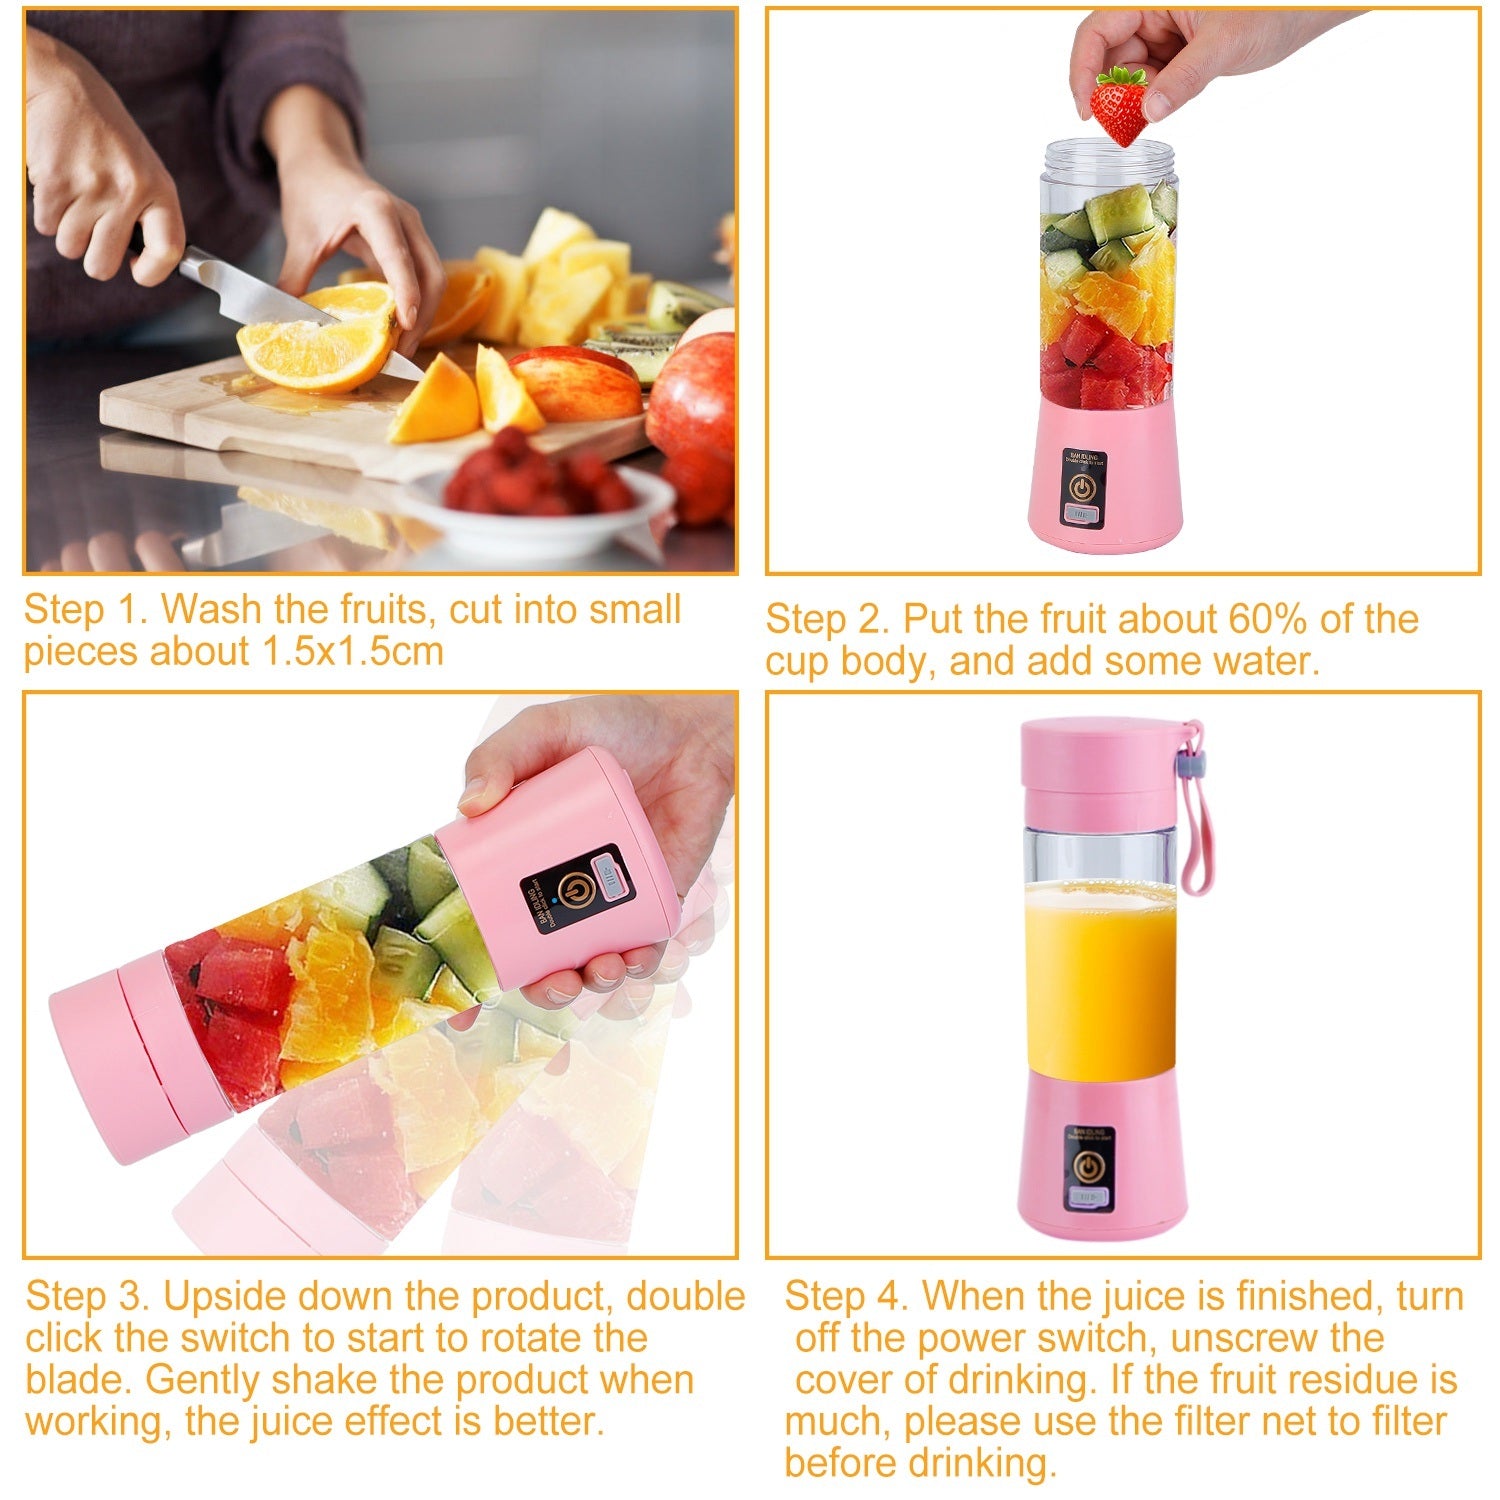 A Portable Juicer Blender USB Rechargeable Juicer Cup Fruit Baby Food Mixing Machine with 6 Blades Powerful Motor with fruit in it and 304 stainless steel blades.